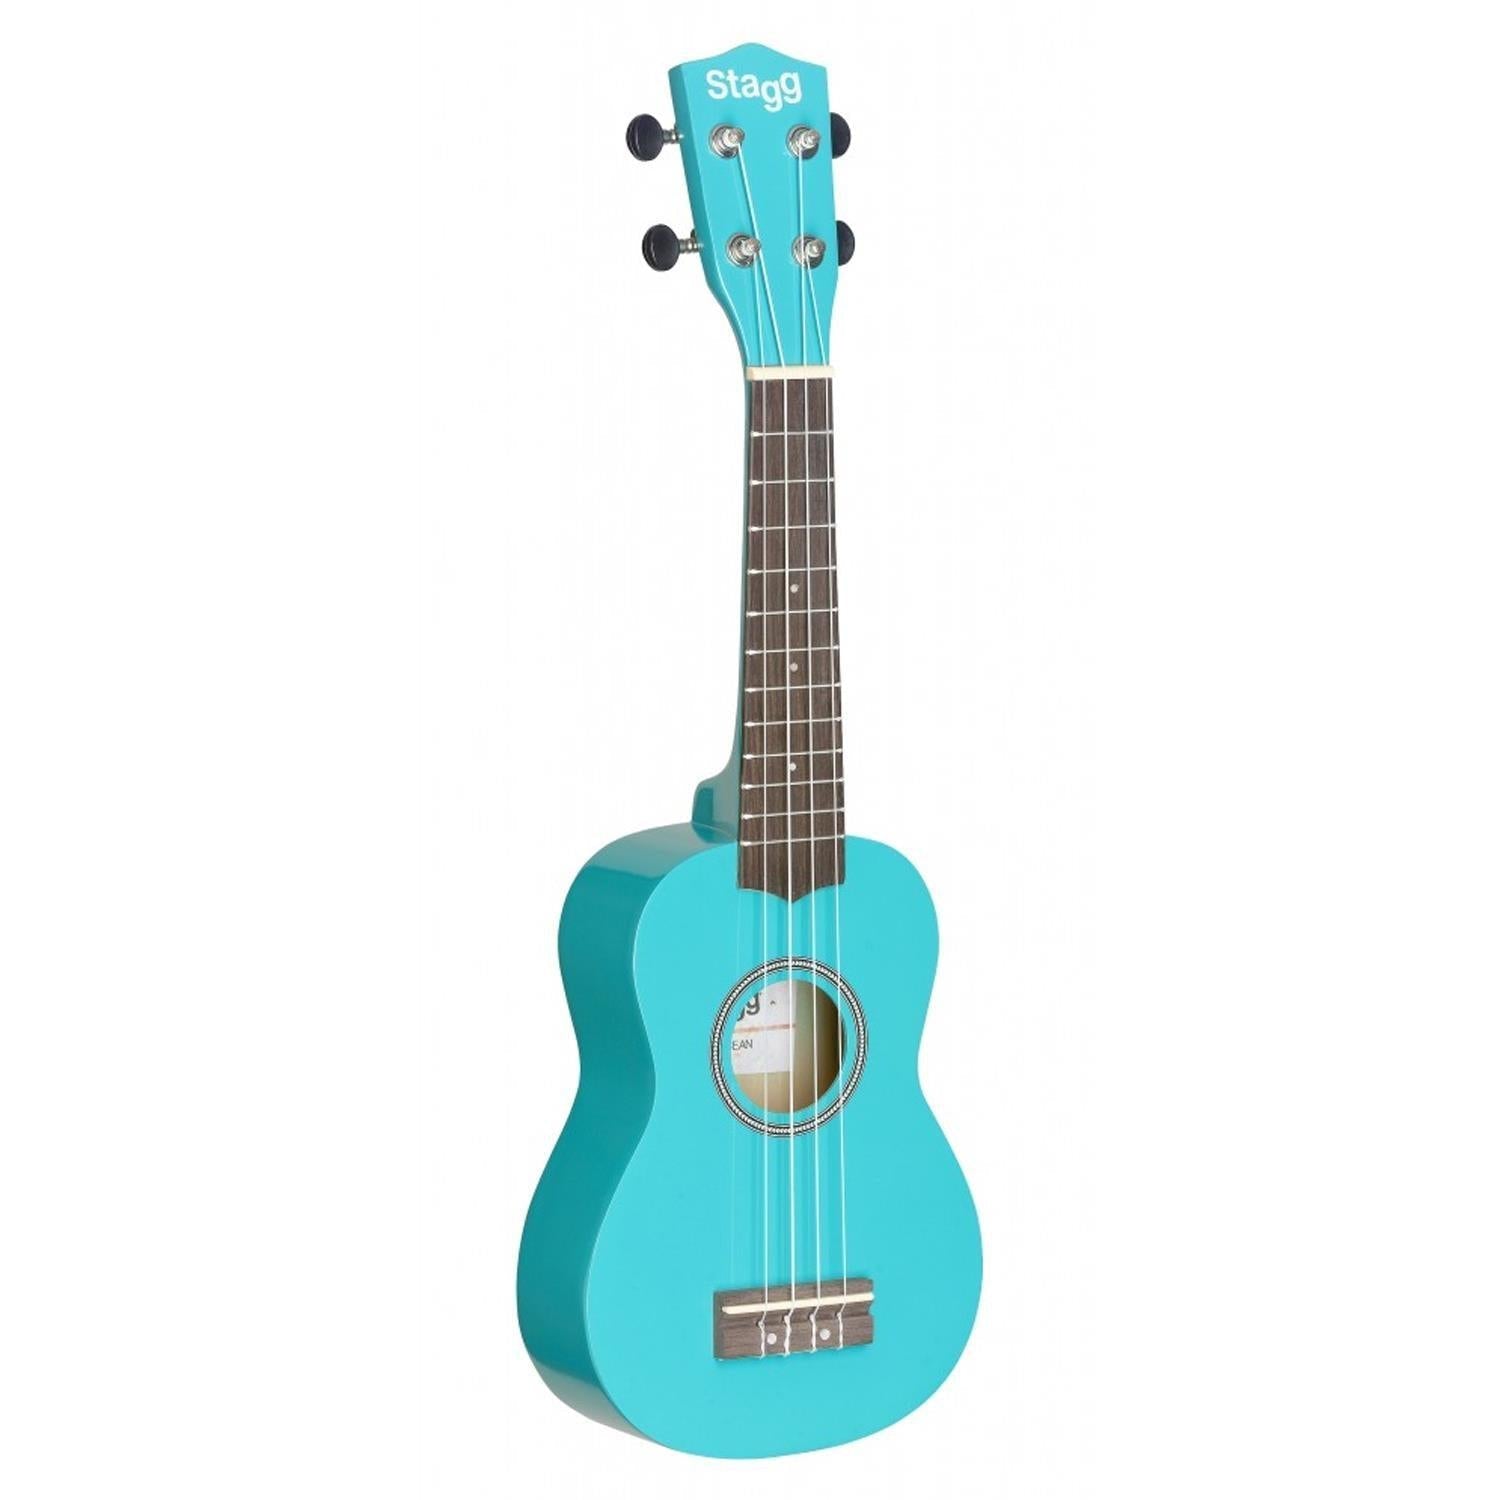 Stagg US-Ocean Blue Soprano Ukulele With Bag - DY Pro Audio